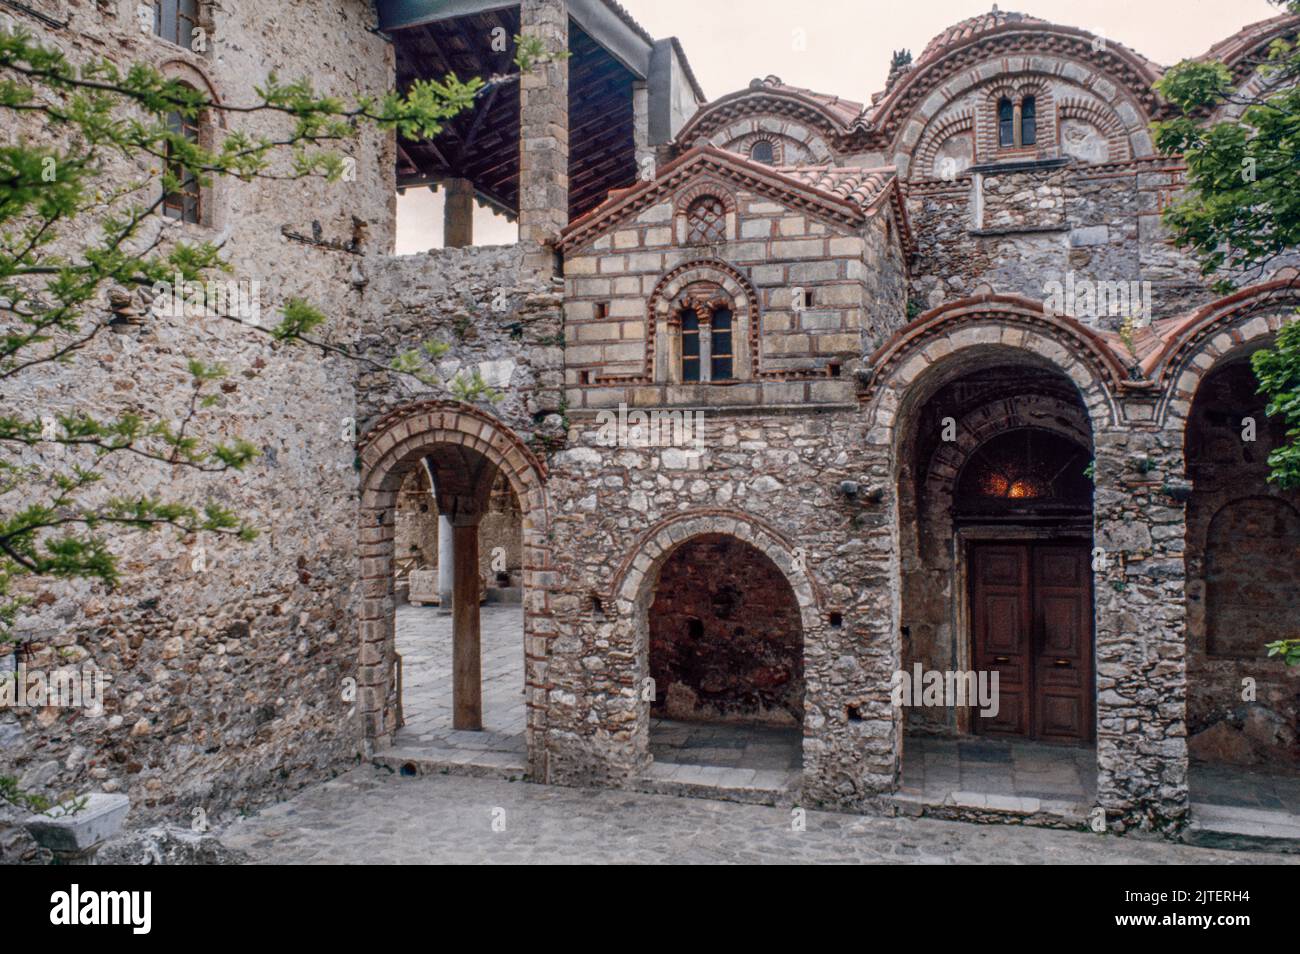 Metropolis of Saint Demetrios at Mystras (Mistras or Myzithras), a fortified town and a former municipality in Laconia, Peloponnese, Greece near ancient Sparta, it served as the capital of the Byzantine Despotate of the Morea. March 1980. Archival scan from a slide. Stock Photo